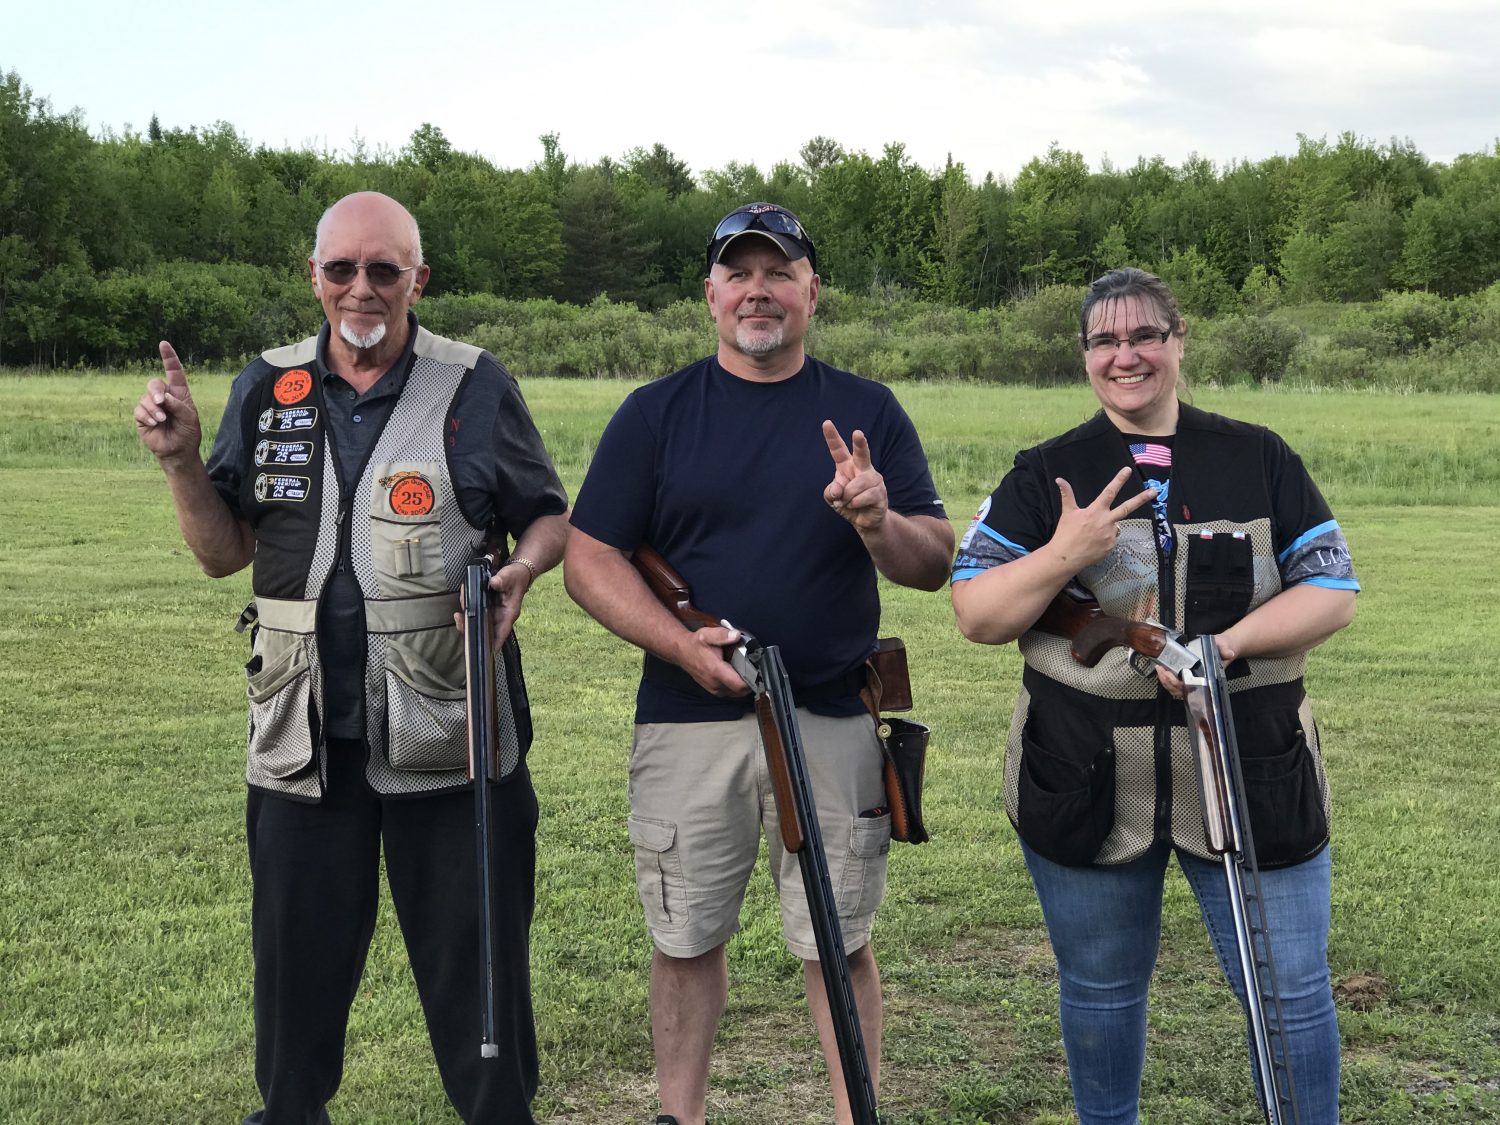 Trap Team Coaches raise funds for charity, shoot for “Top Gun” bragging rights